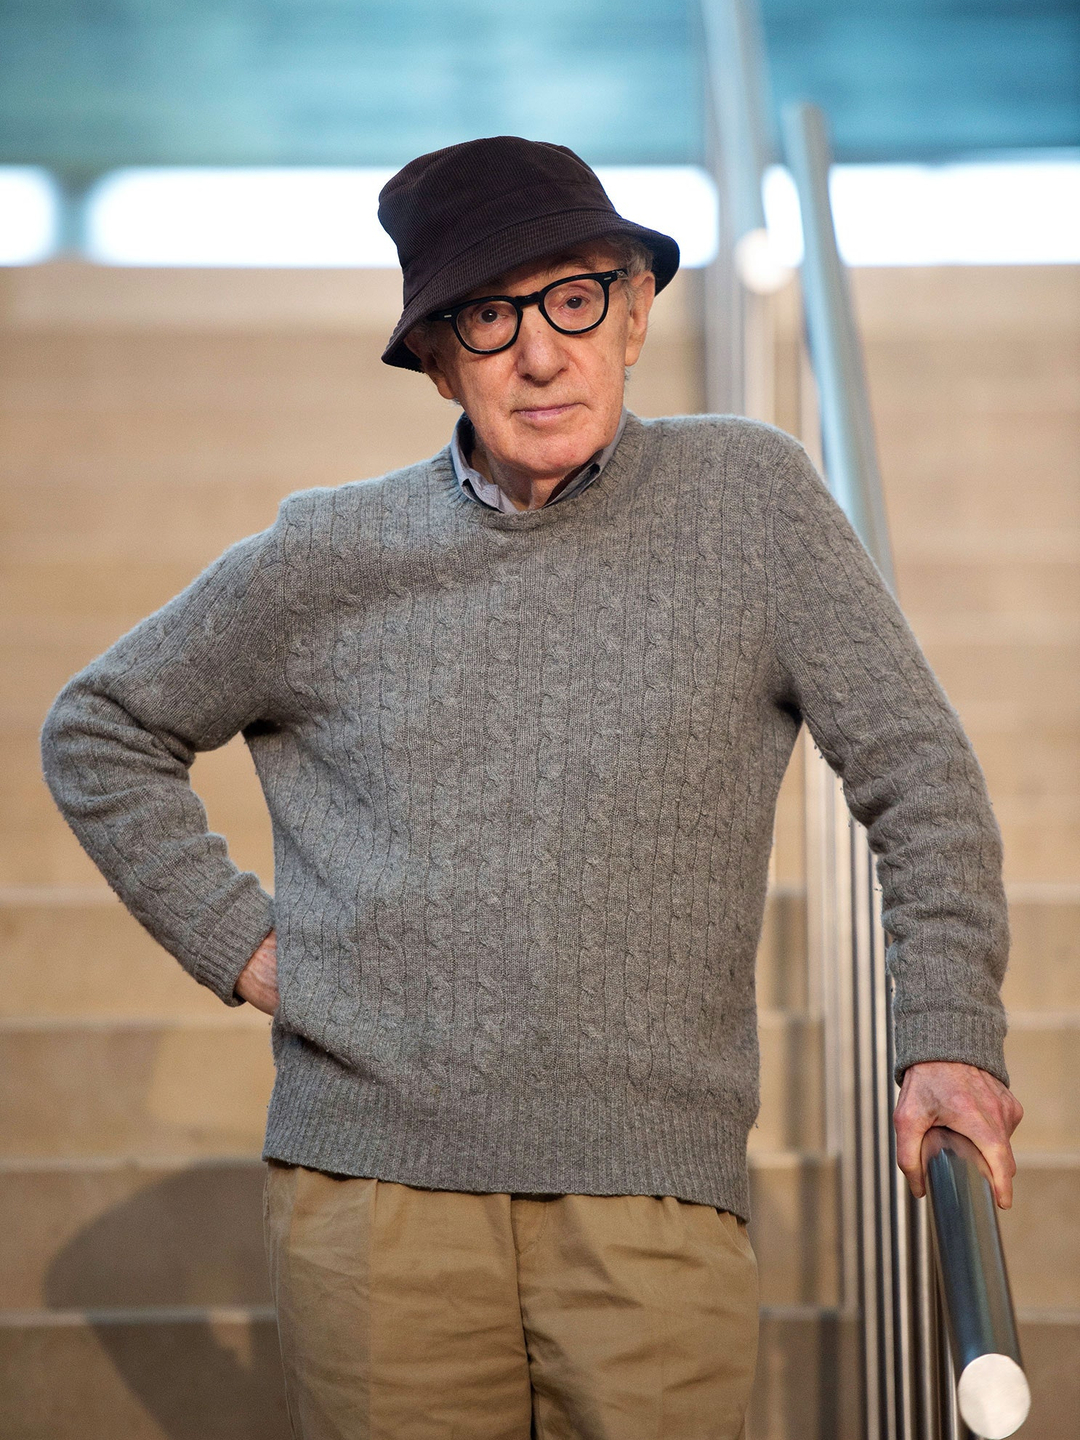 Woody Allen where did he study